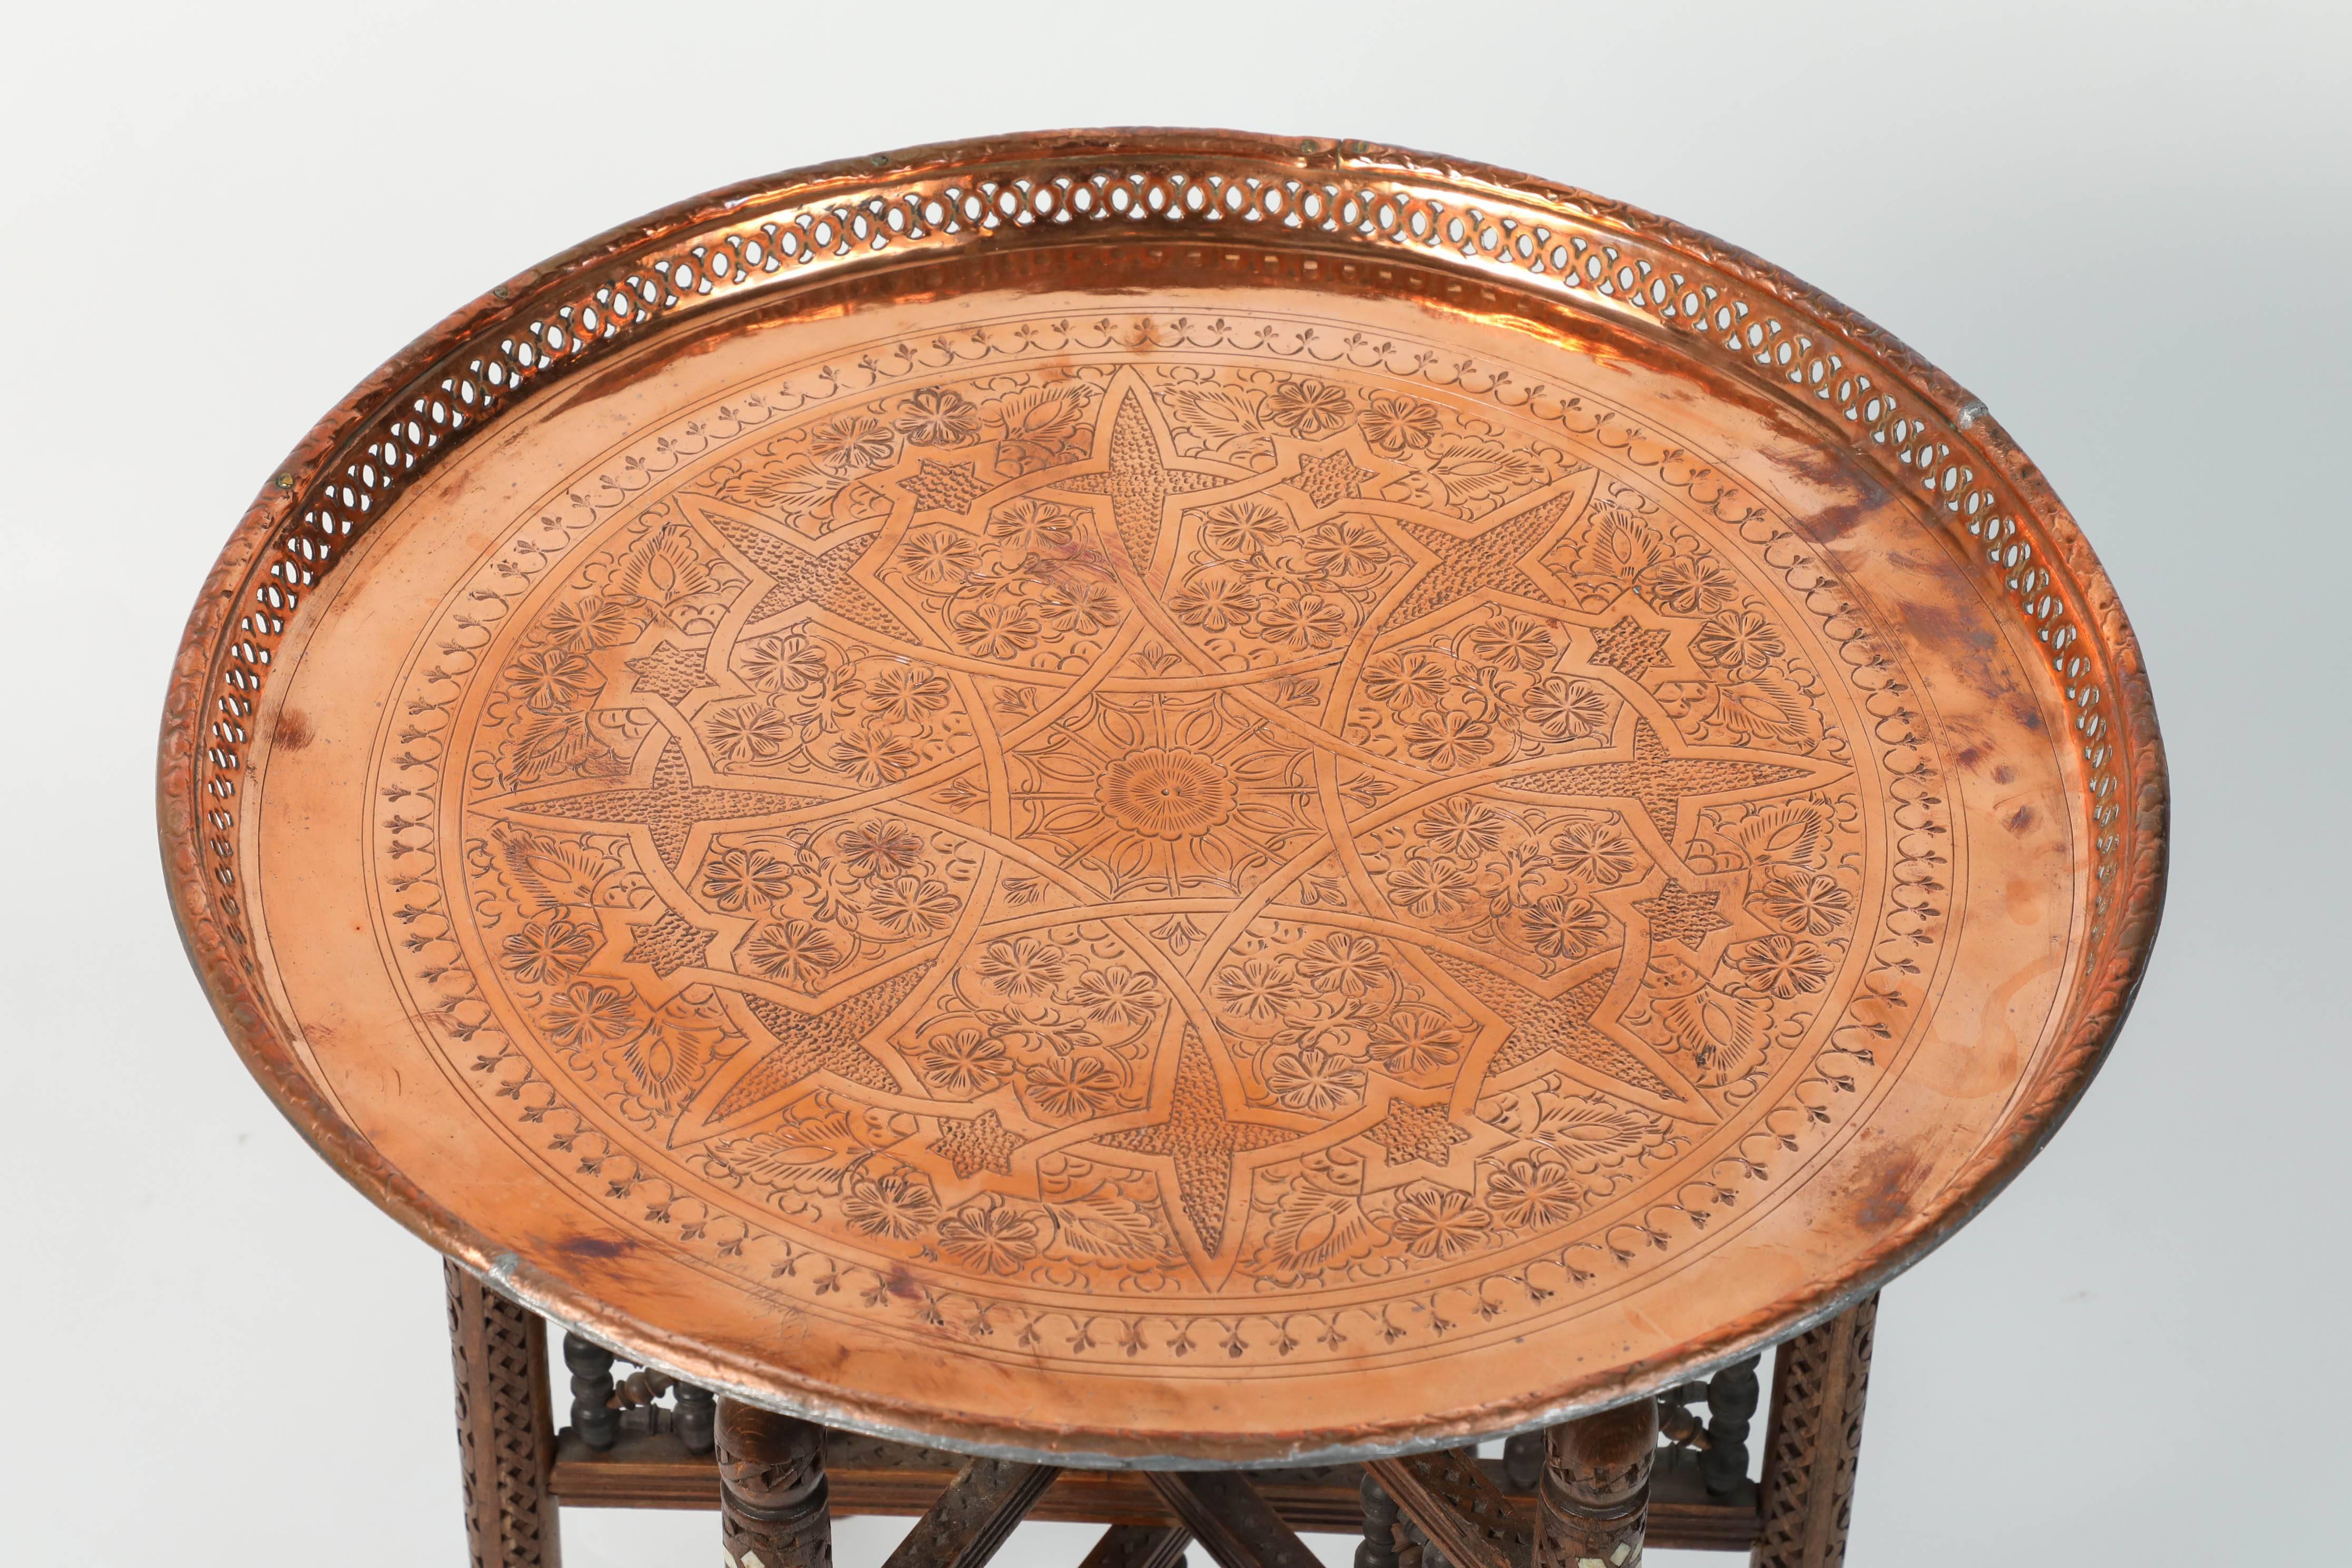 Moroccan Moorish antique copper tray table with wooden hand-carved folding base.
The hammered copper tray is decorated with geometric Islamic Moorish designs.
The top is removable and consist of a round Moroccan copper tray on a Middle Eastern